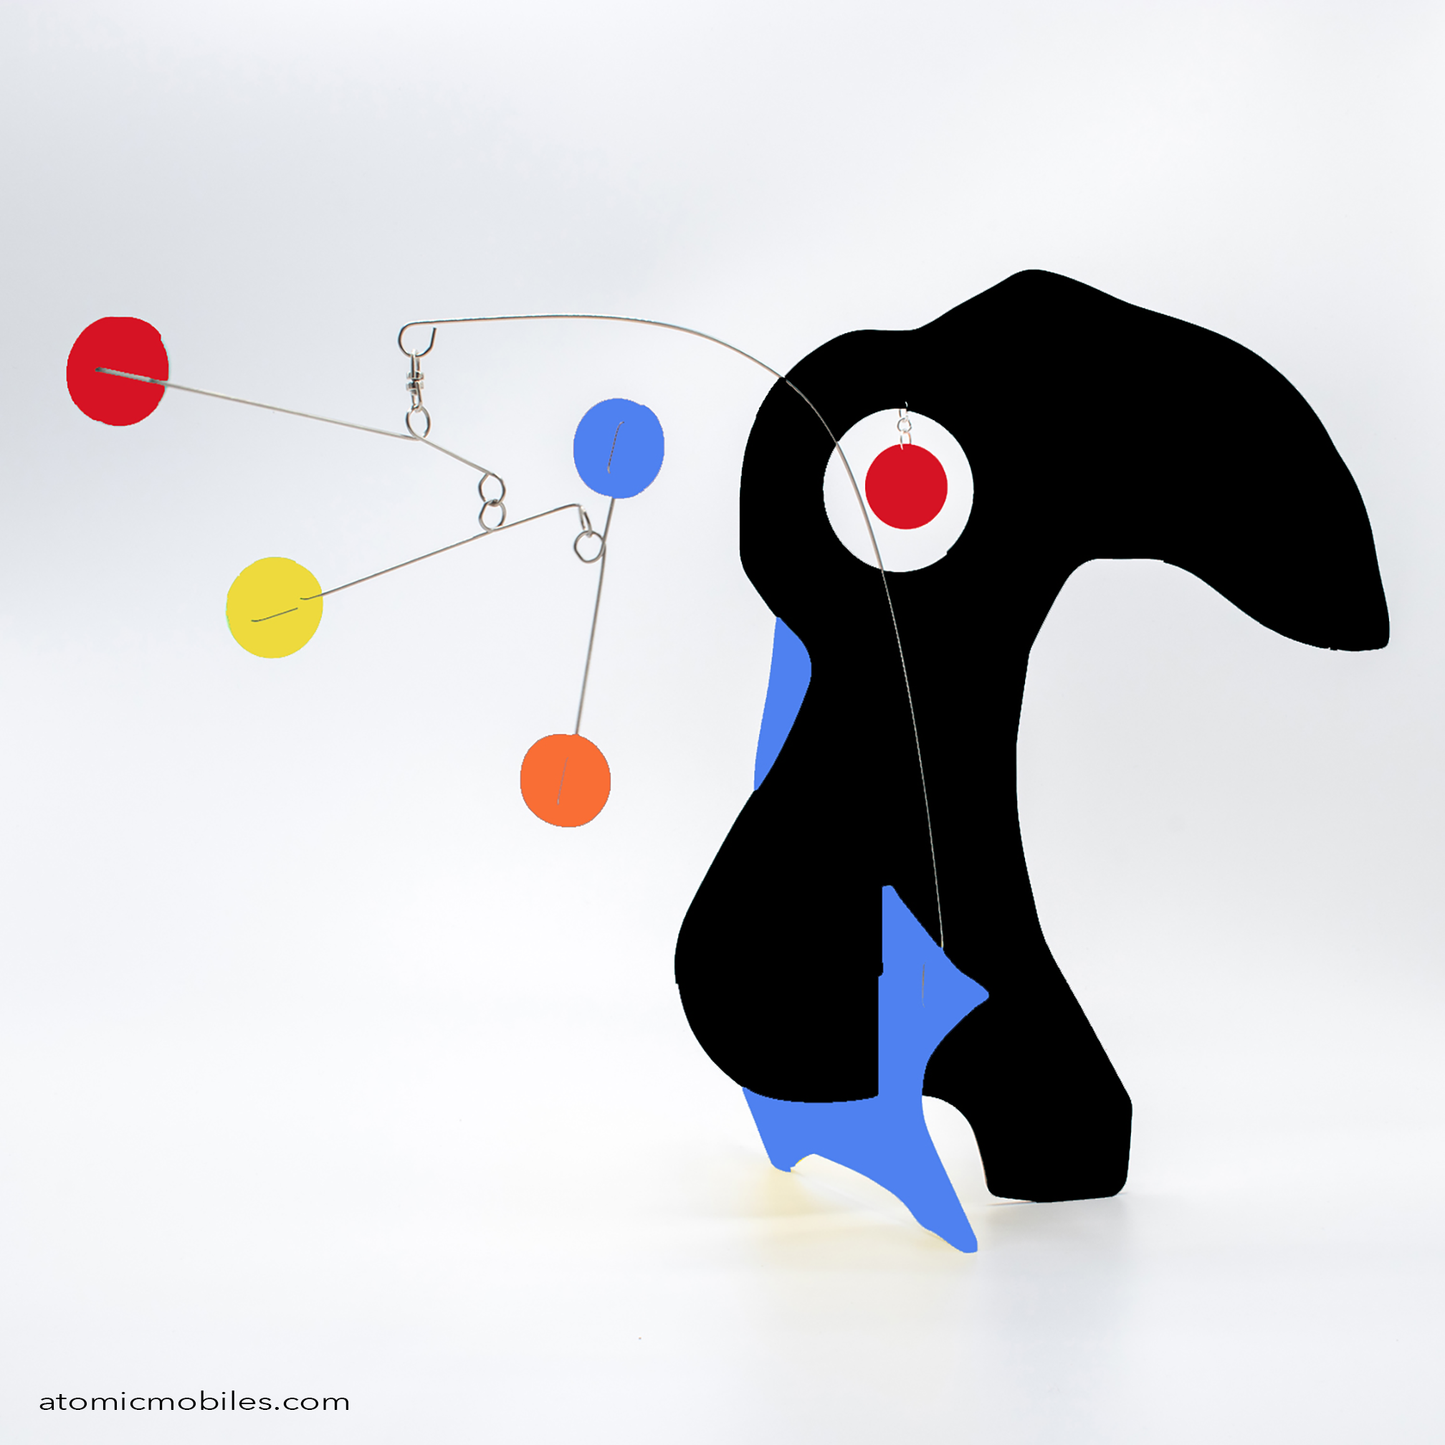 KinetiCats Collection Bird in Black, Blue, Orange, Red, Yellow- one of 12 Modern Cute Abstract Animal Art Sculpture Kinetic Stabiles inspired by Dada and mid century modern style art by AtomicMobiles.com